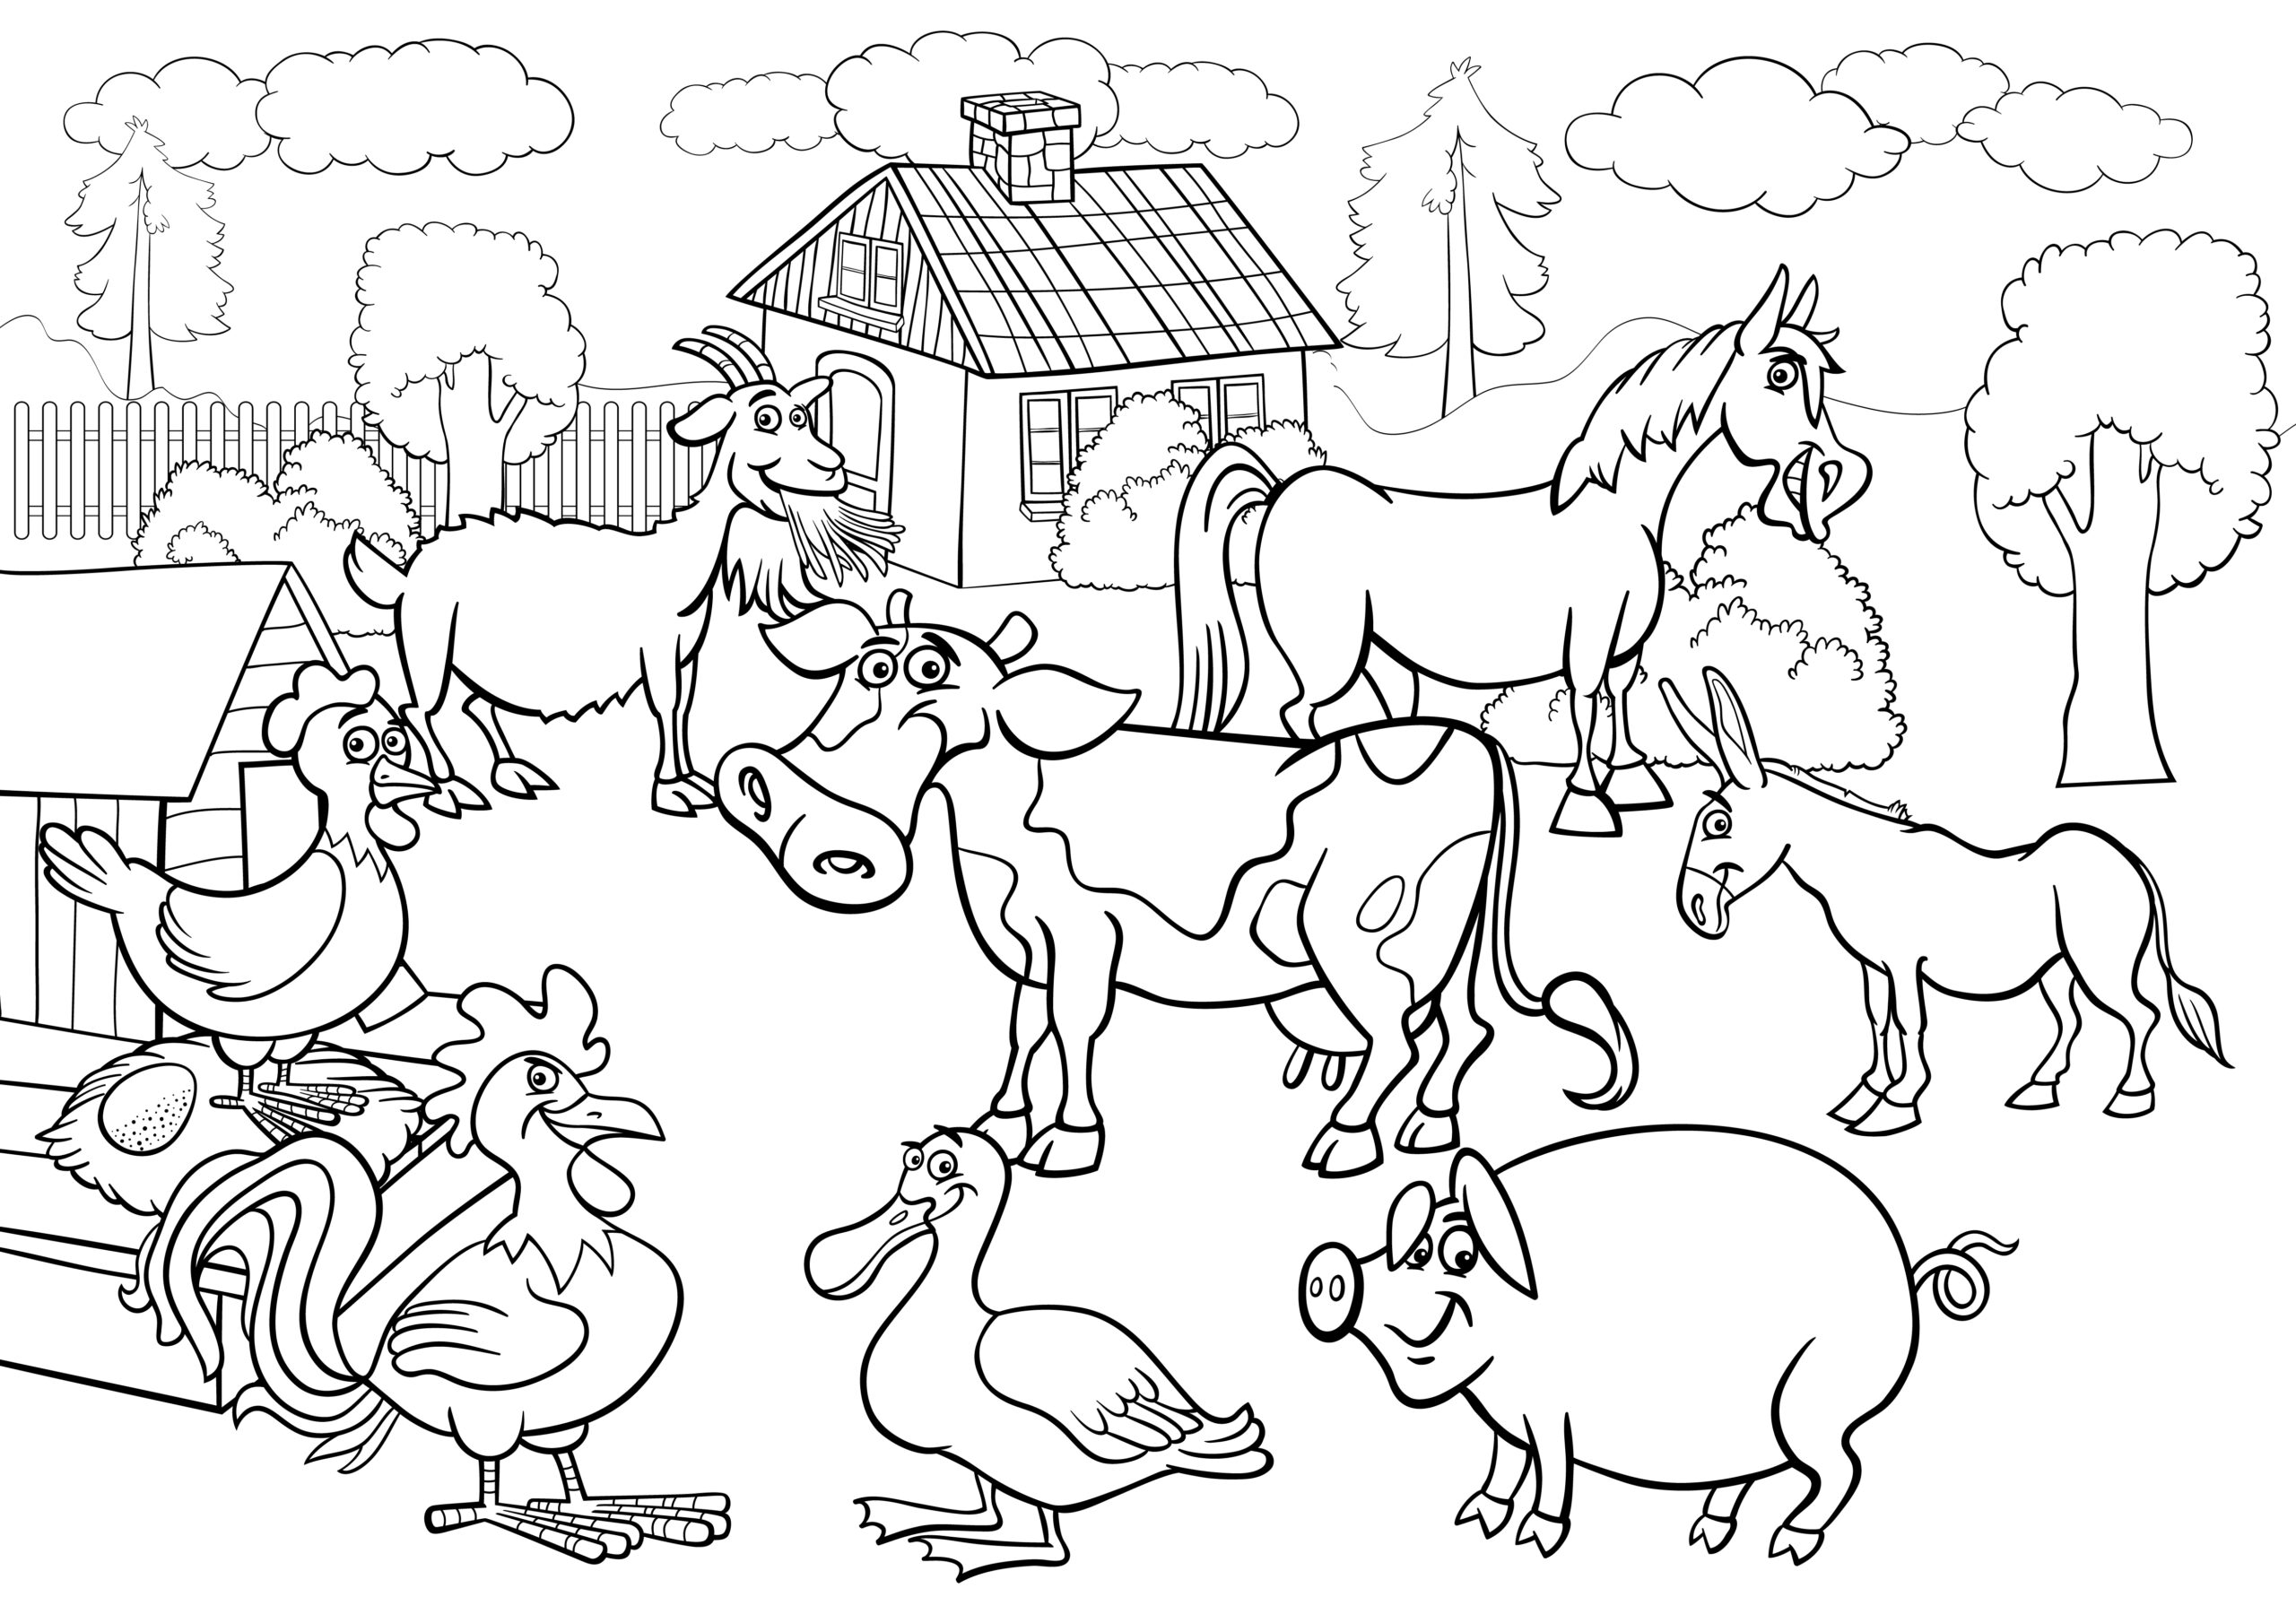 Printable Farm Coloring Pages For Kids. That Farm needs some color!